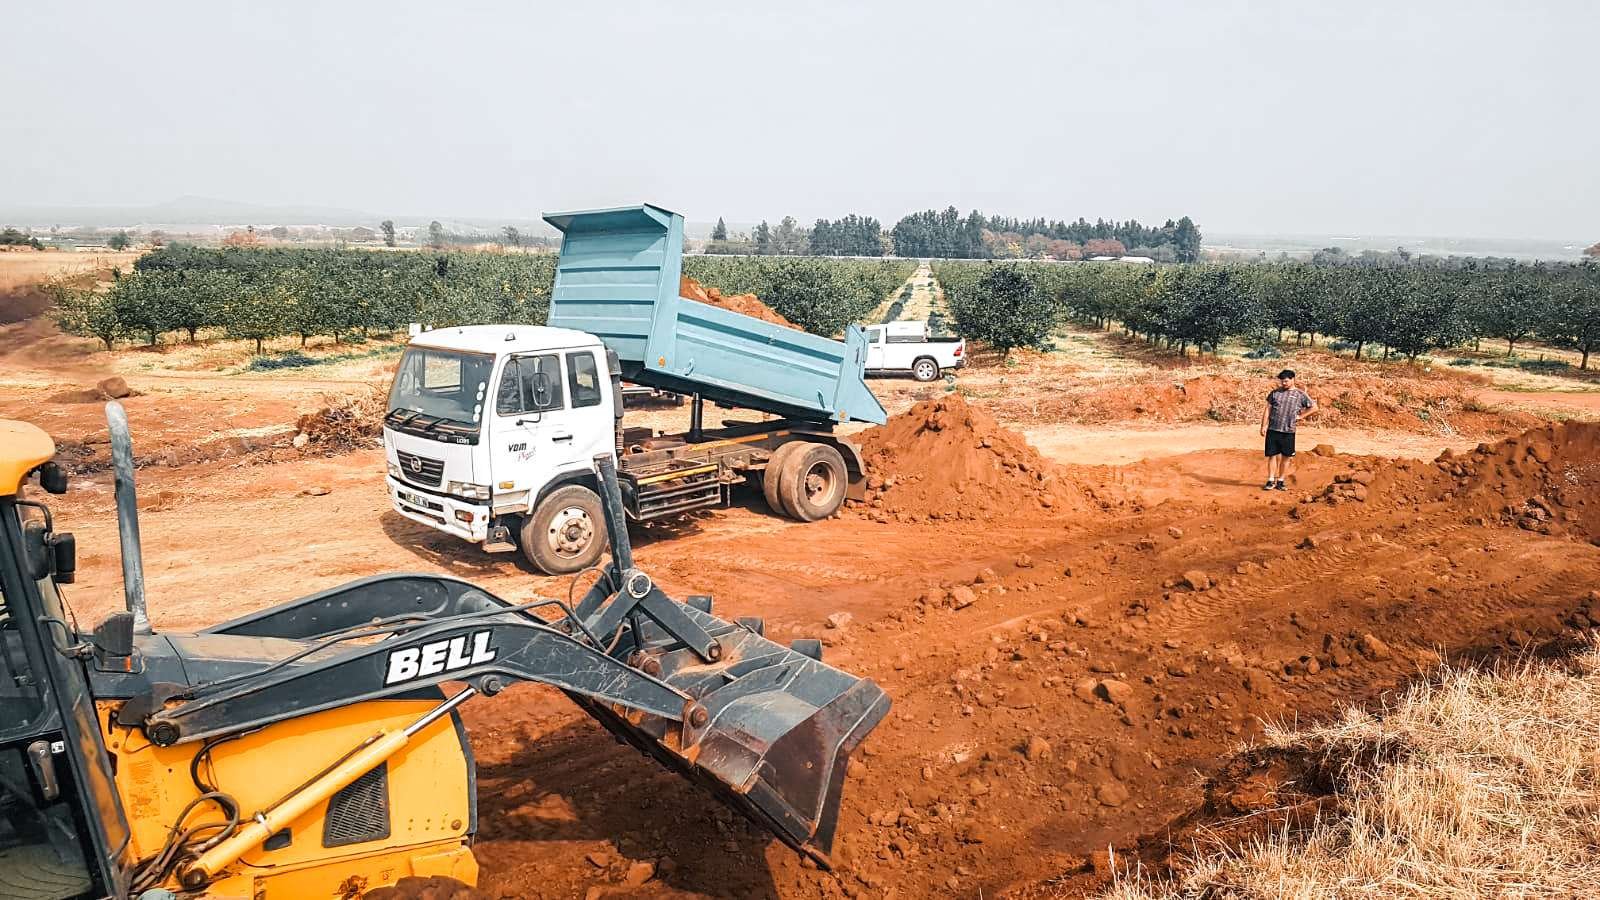 A construction or agricultural scene with person surveying a large dirt excavation area, featuring plant hire equipment including a yellow bell backhoe loader in the foreground, and a white tipper truck dumping soil in a